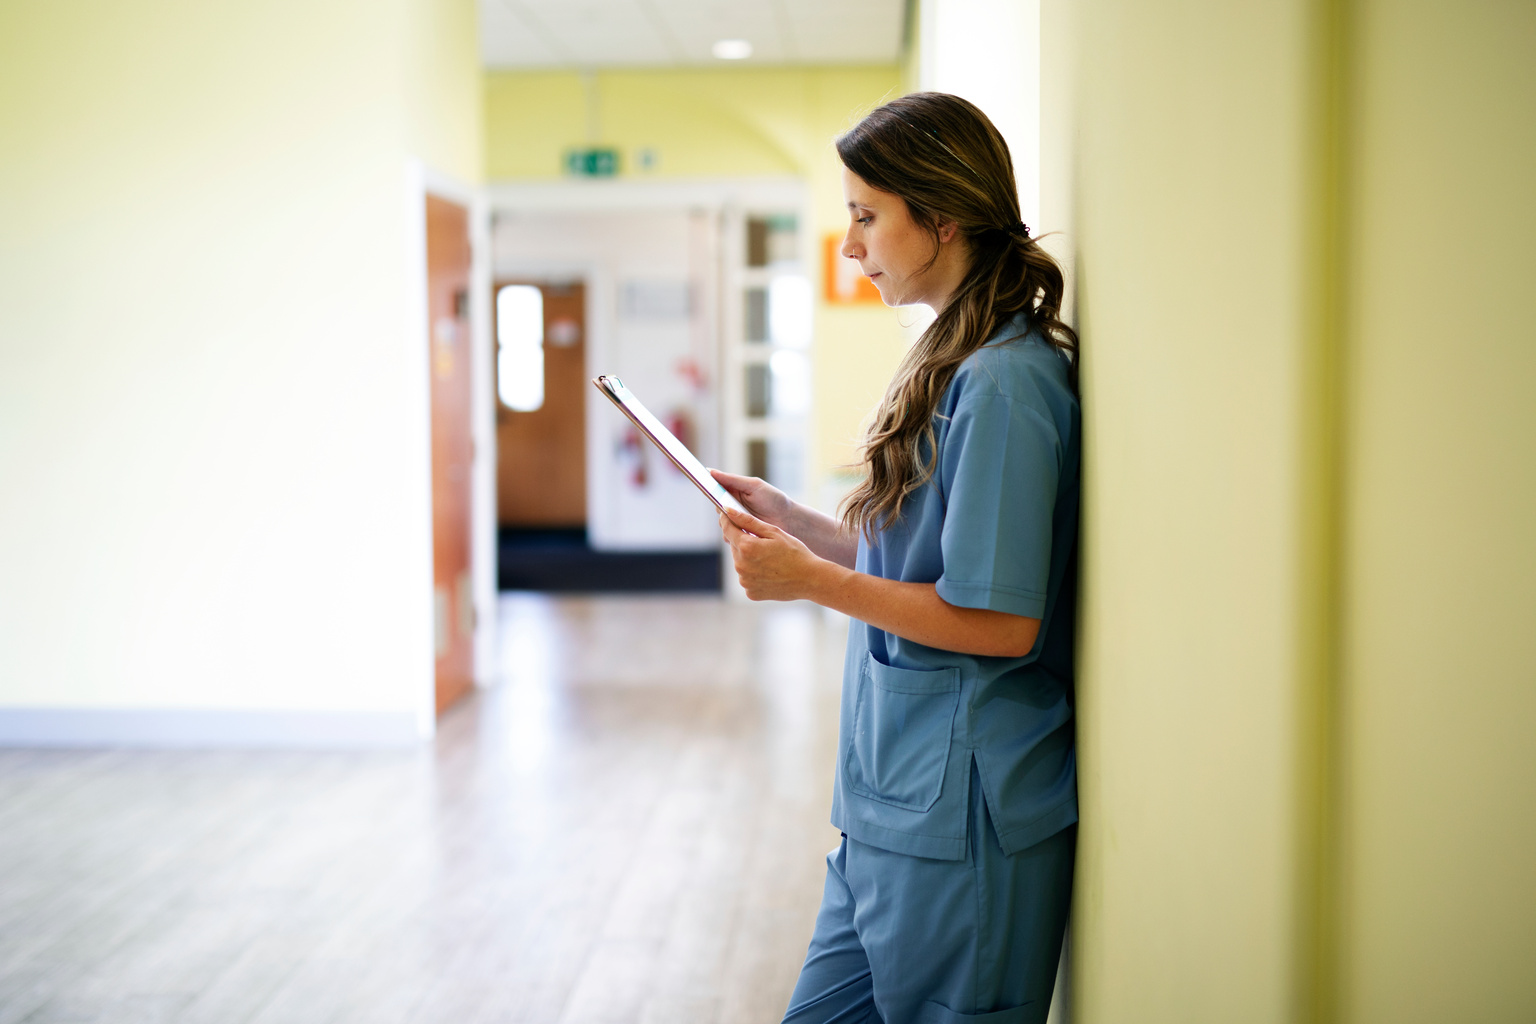 New approaches to nurse retention